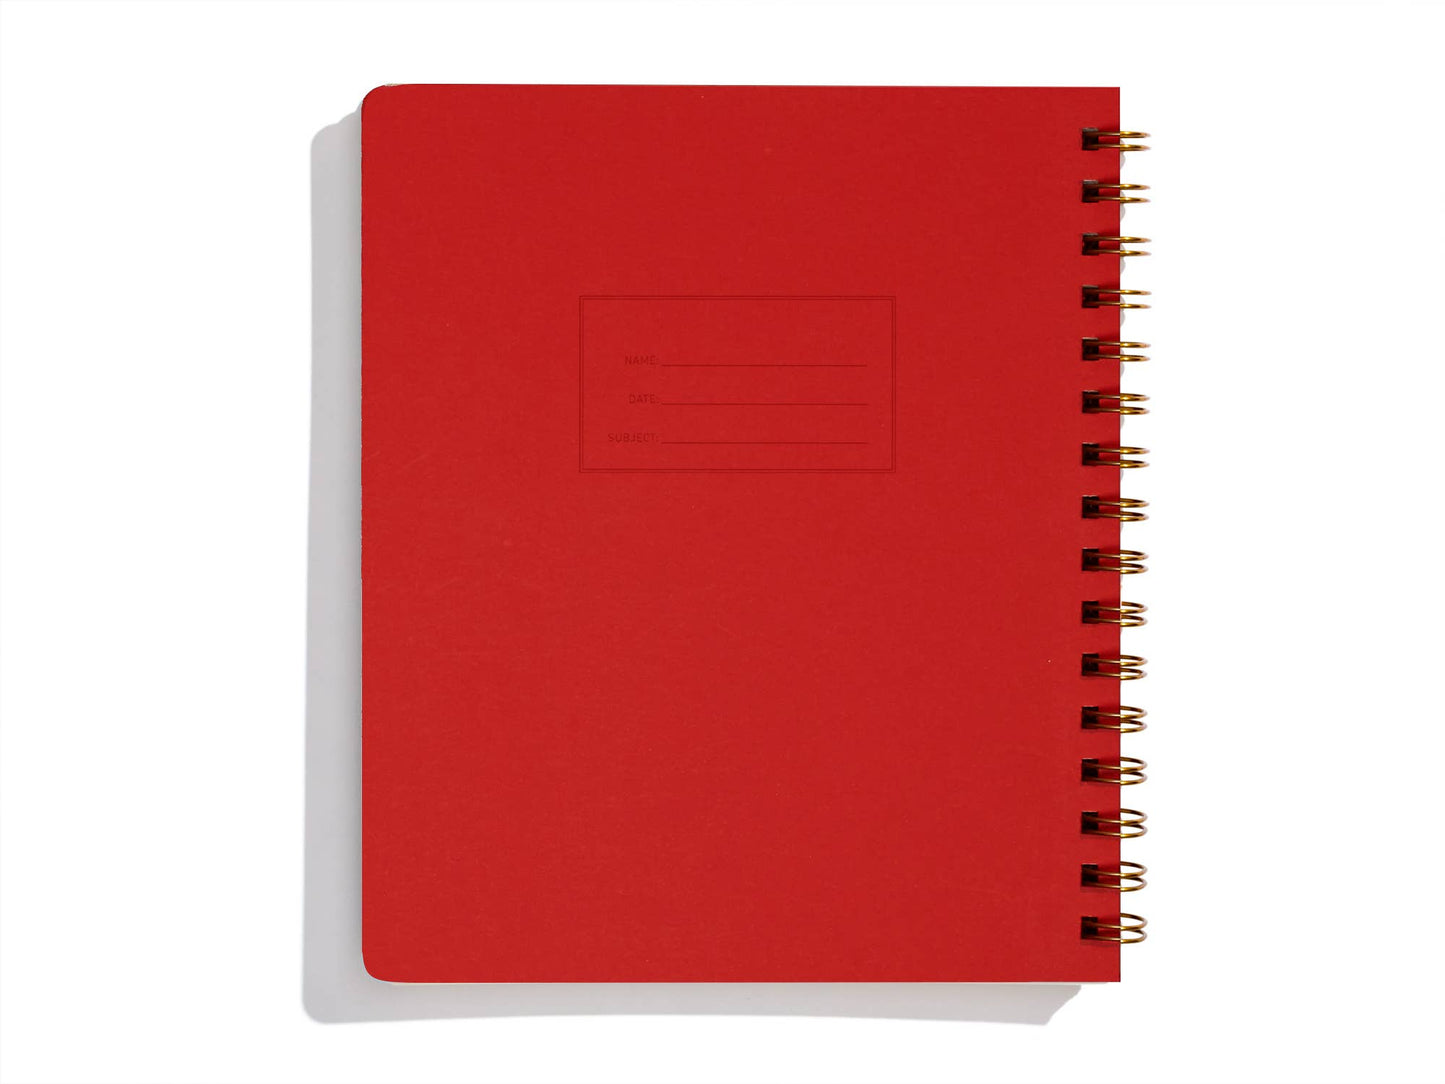 Lefty Standard Notebook - Solid Color Cover: Mint